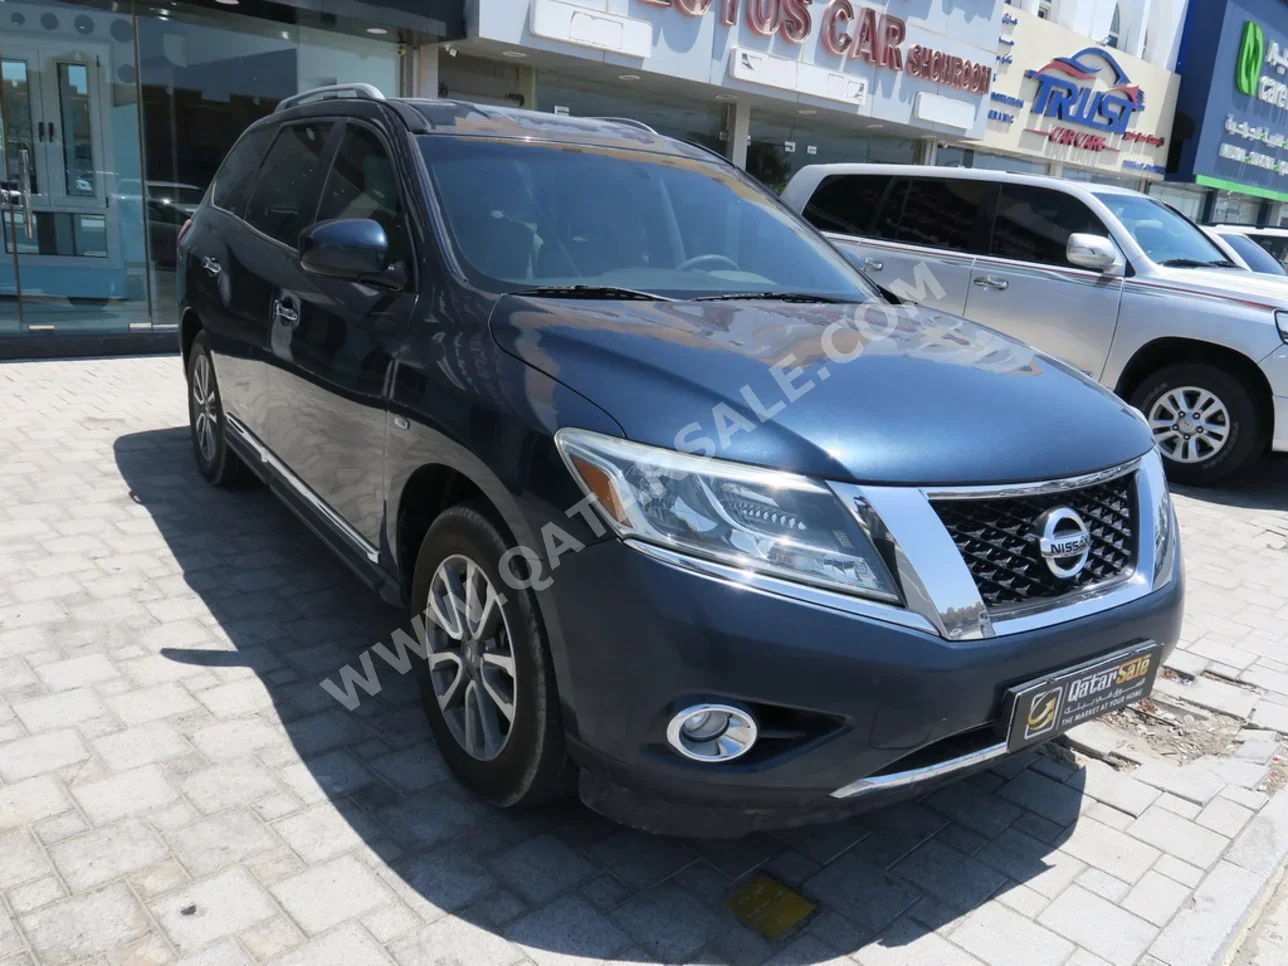 Nissan  Pathfinder  2014  Automatic  107,000 Km  6 Cylinder  Four Wheel Drive (4WD)  SUV  Gray